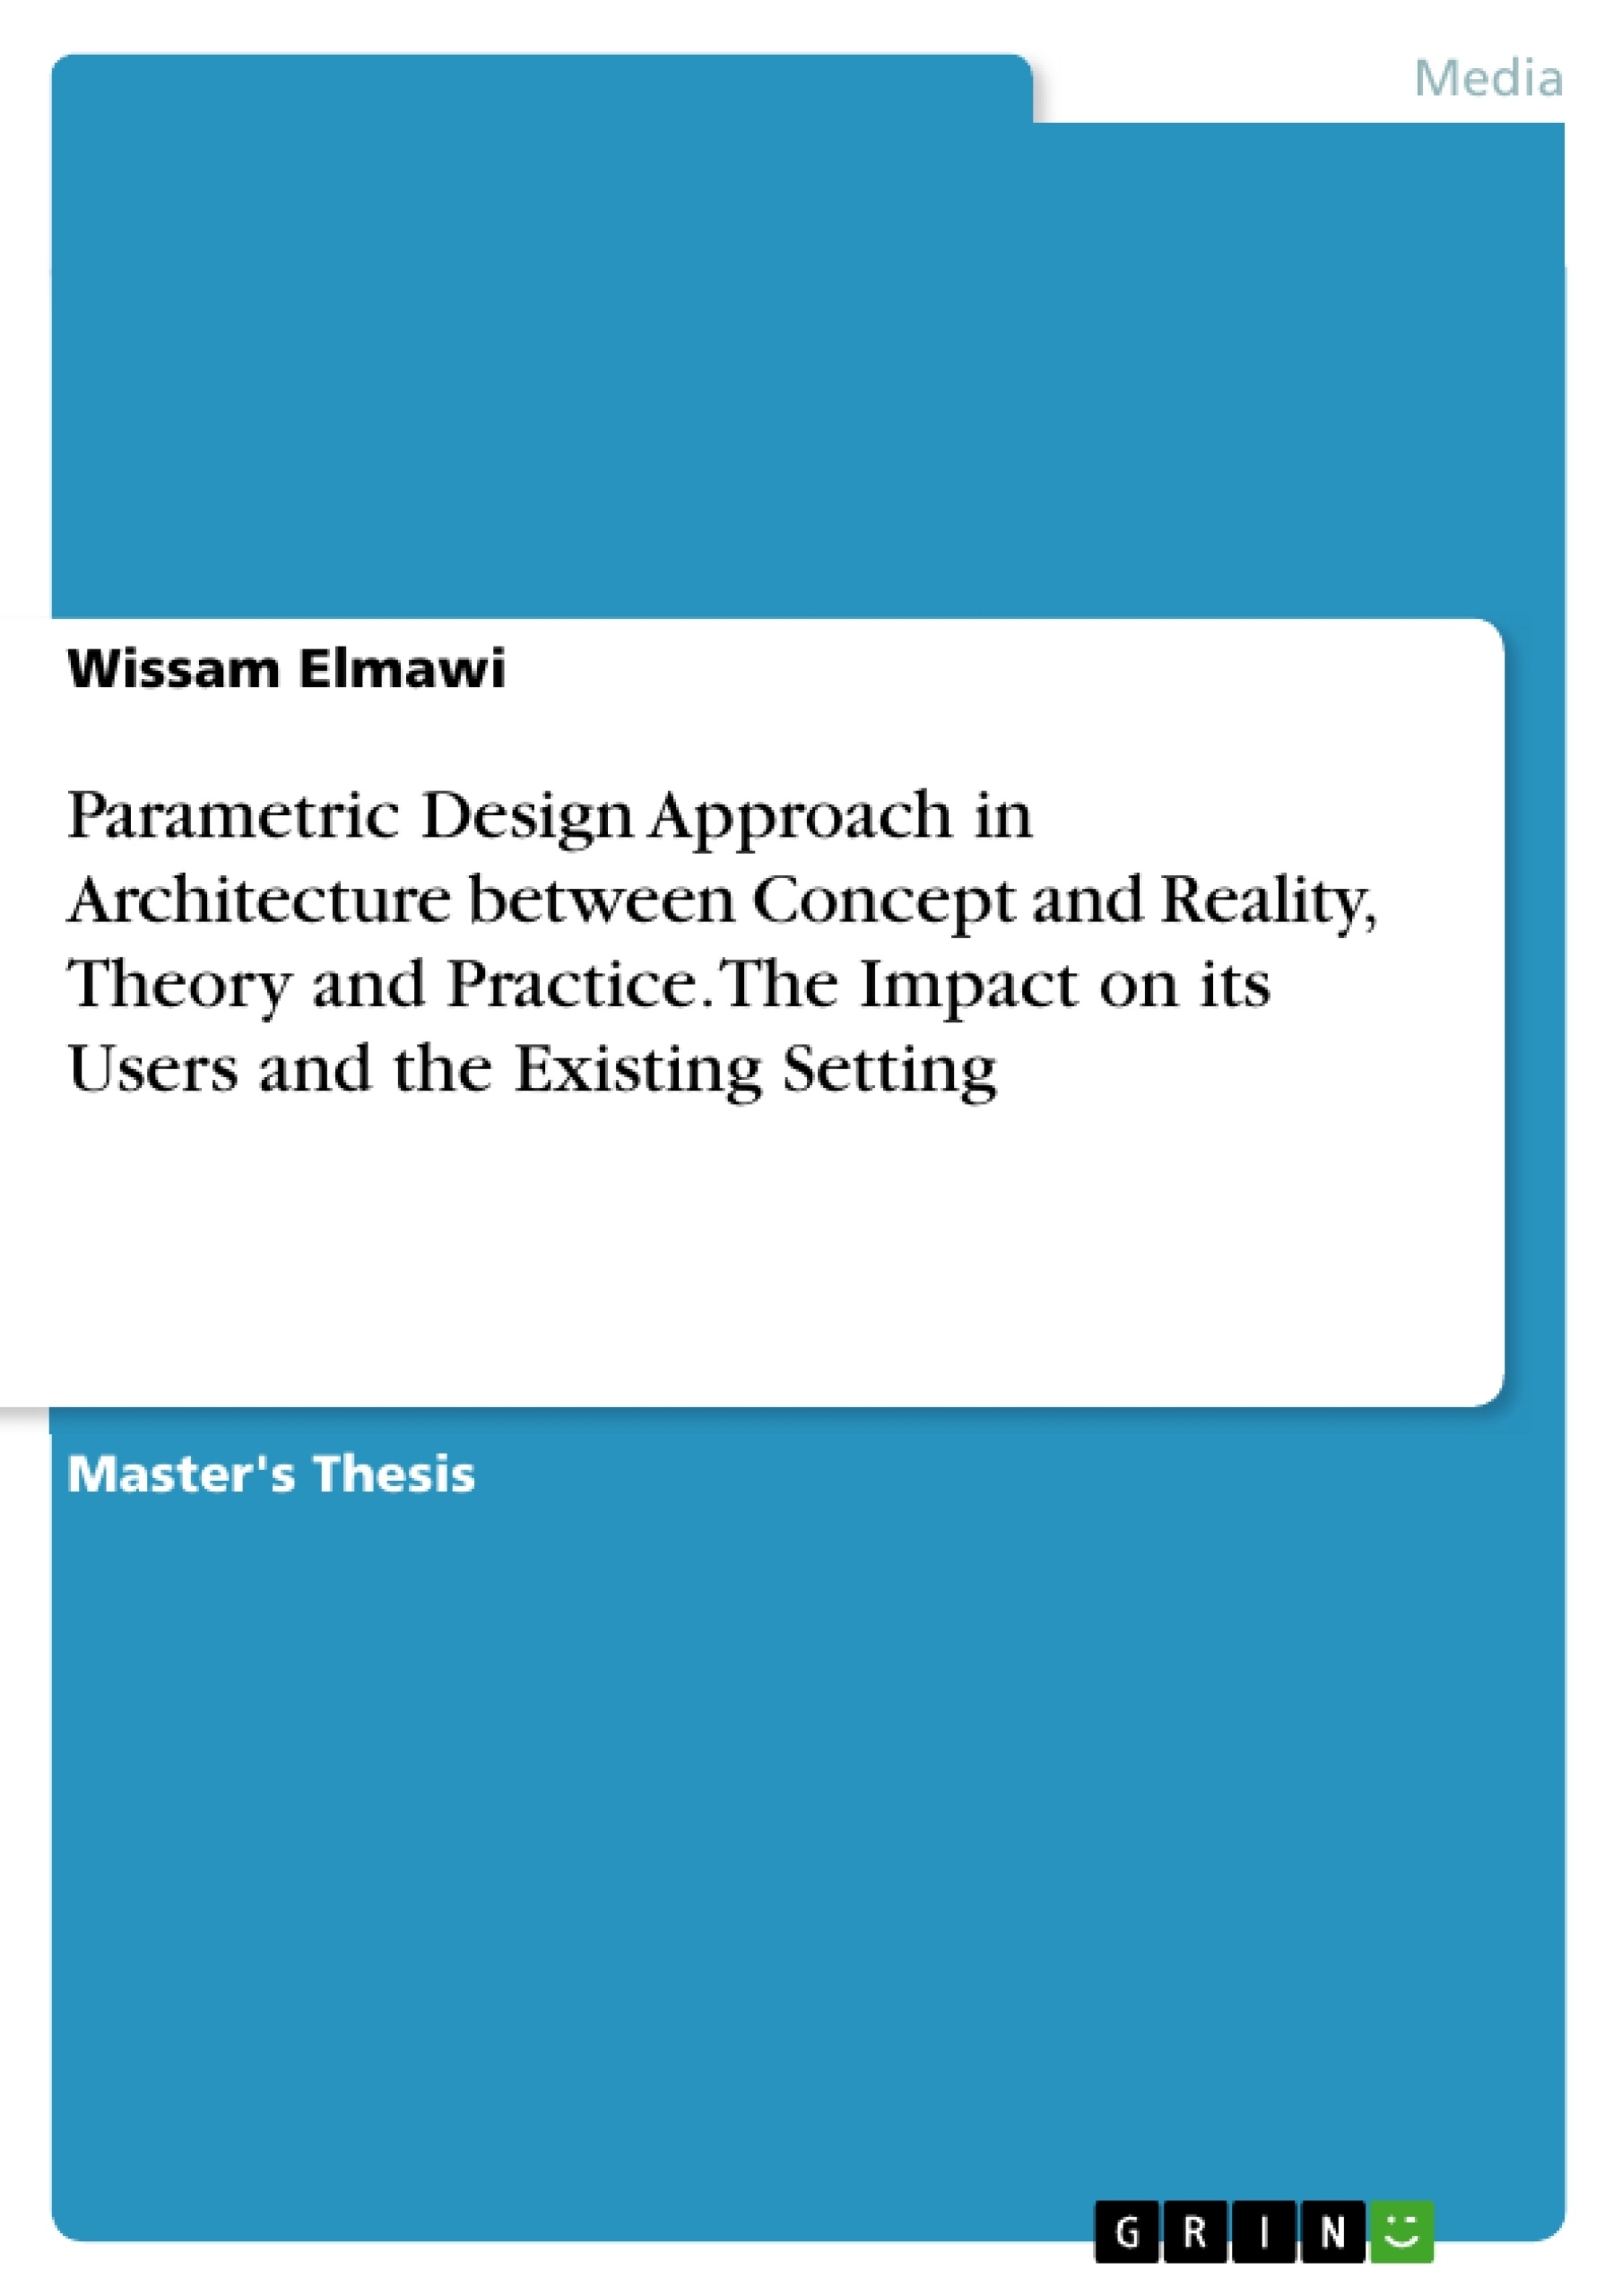 Approach　in　Architecture　on　the　Setting　Theory　between　Concept　Reality,　and　and　Practice.　Users　Existing　The　Impact　its　and　GRIN　Parametric　Design